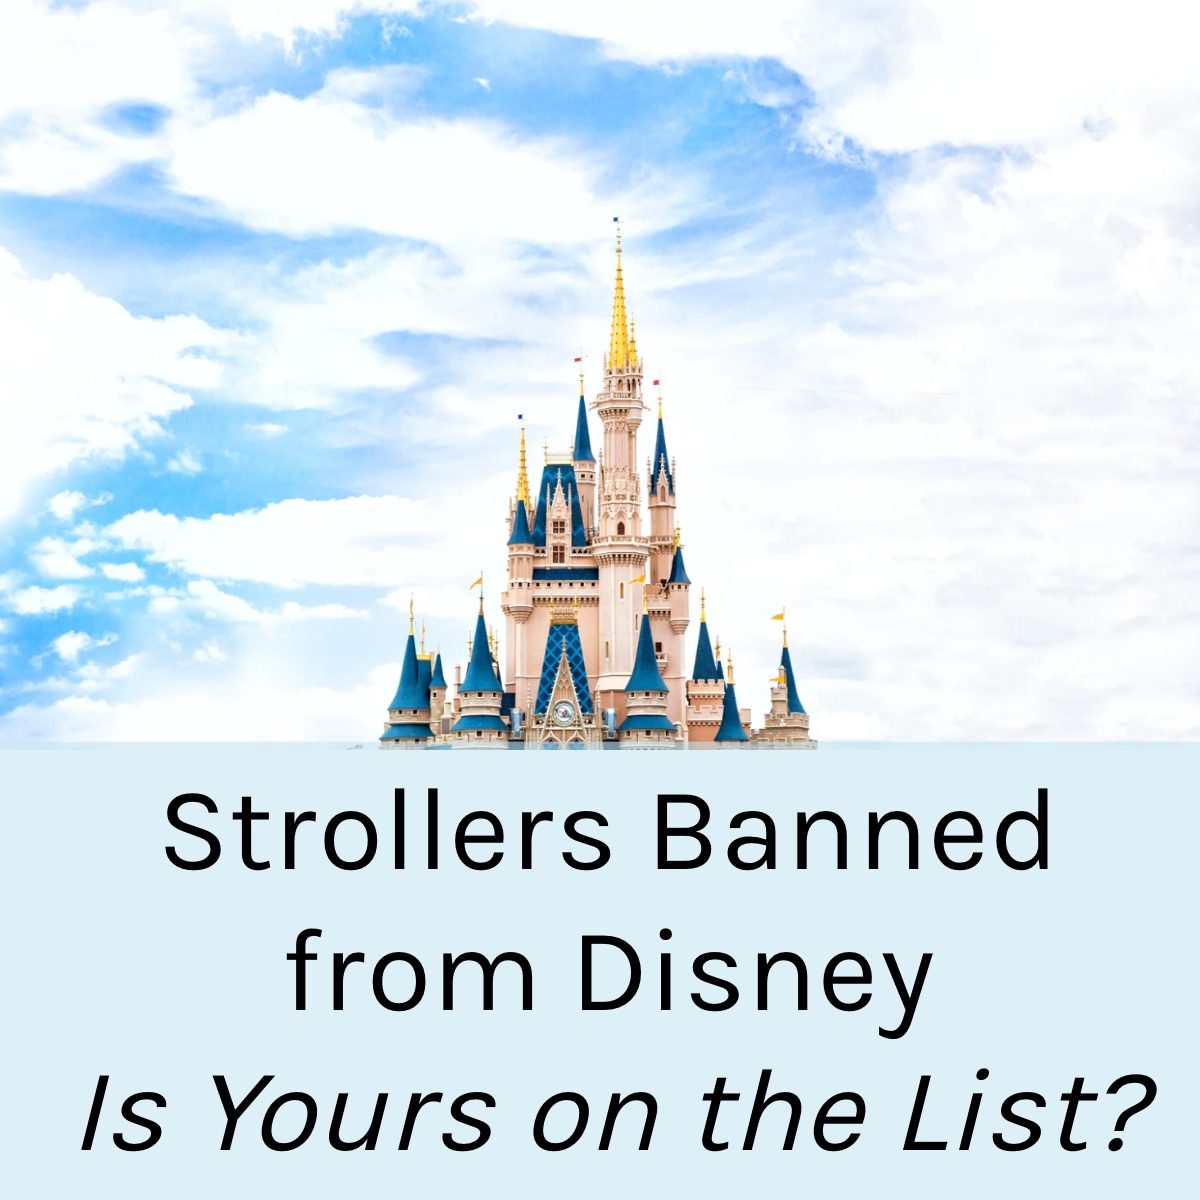 Strollers Banned from Disney